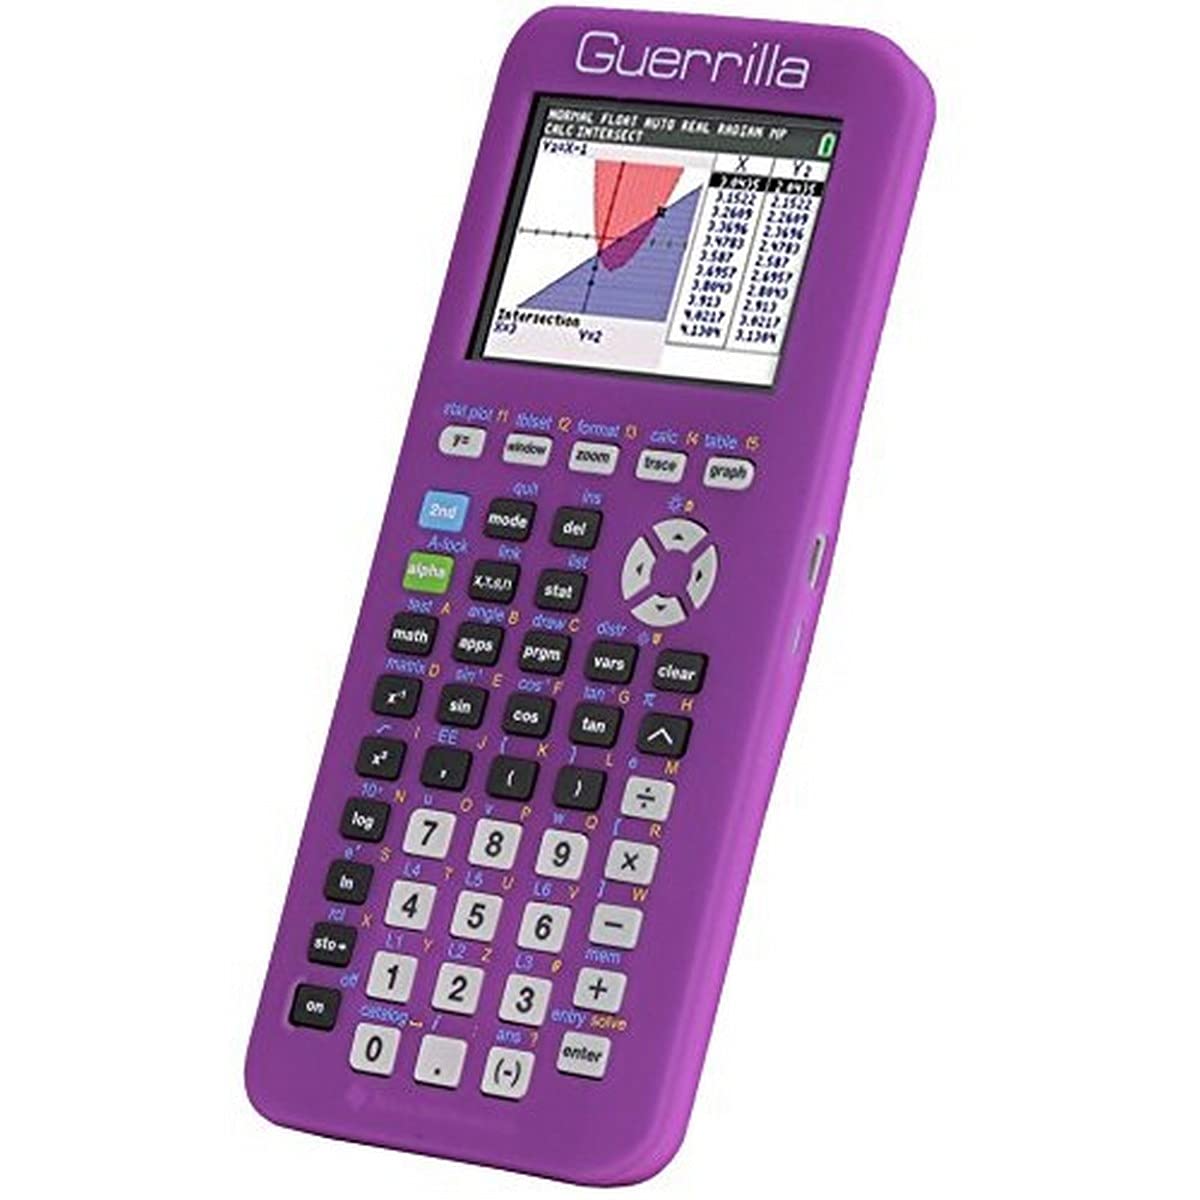 Guerrilla Silicone Case for Texas Instruments TI-84 Plus CE Color Edition Graphing Calculator With Screen protector and Graphing Ruler, Purple